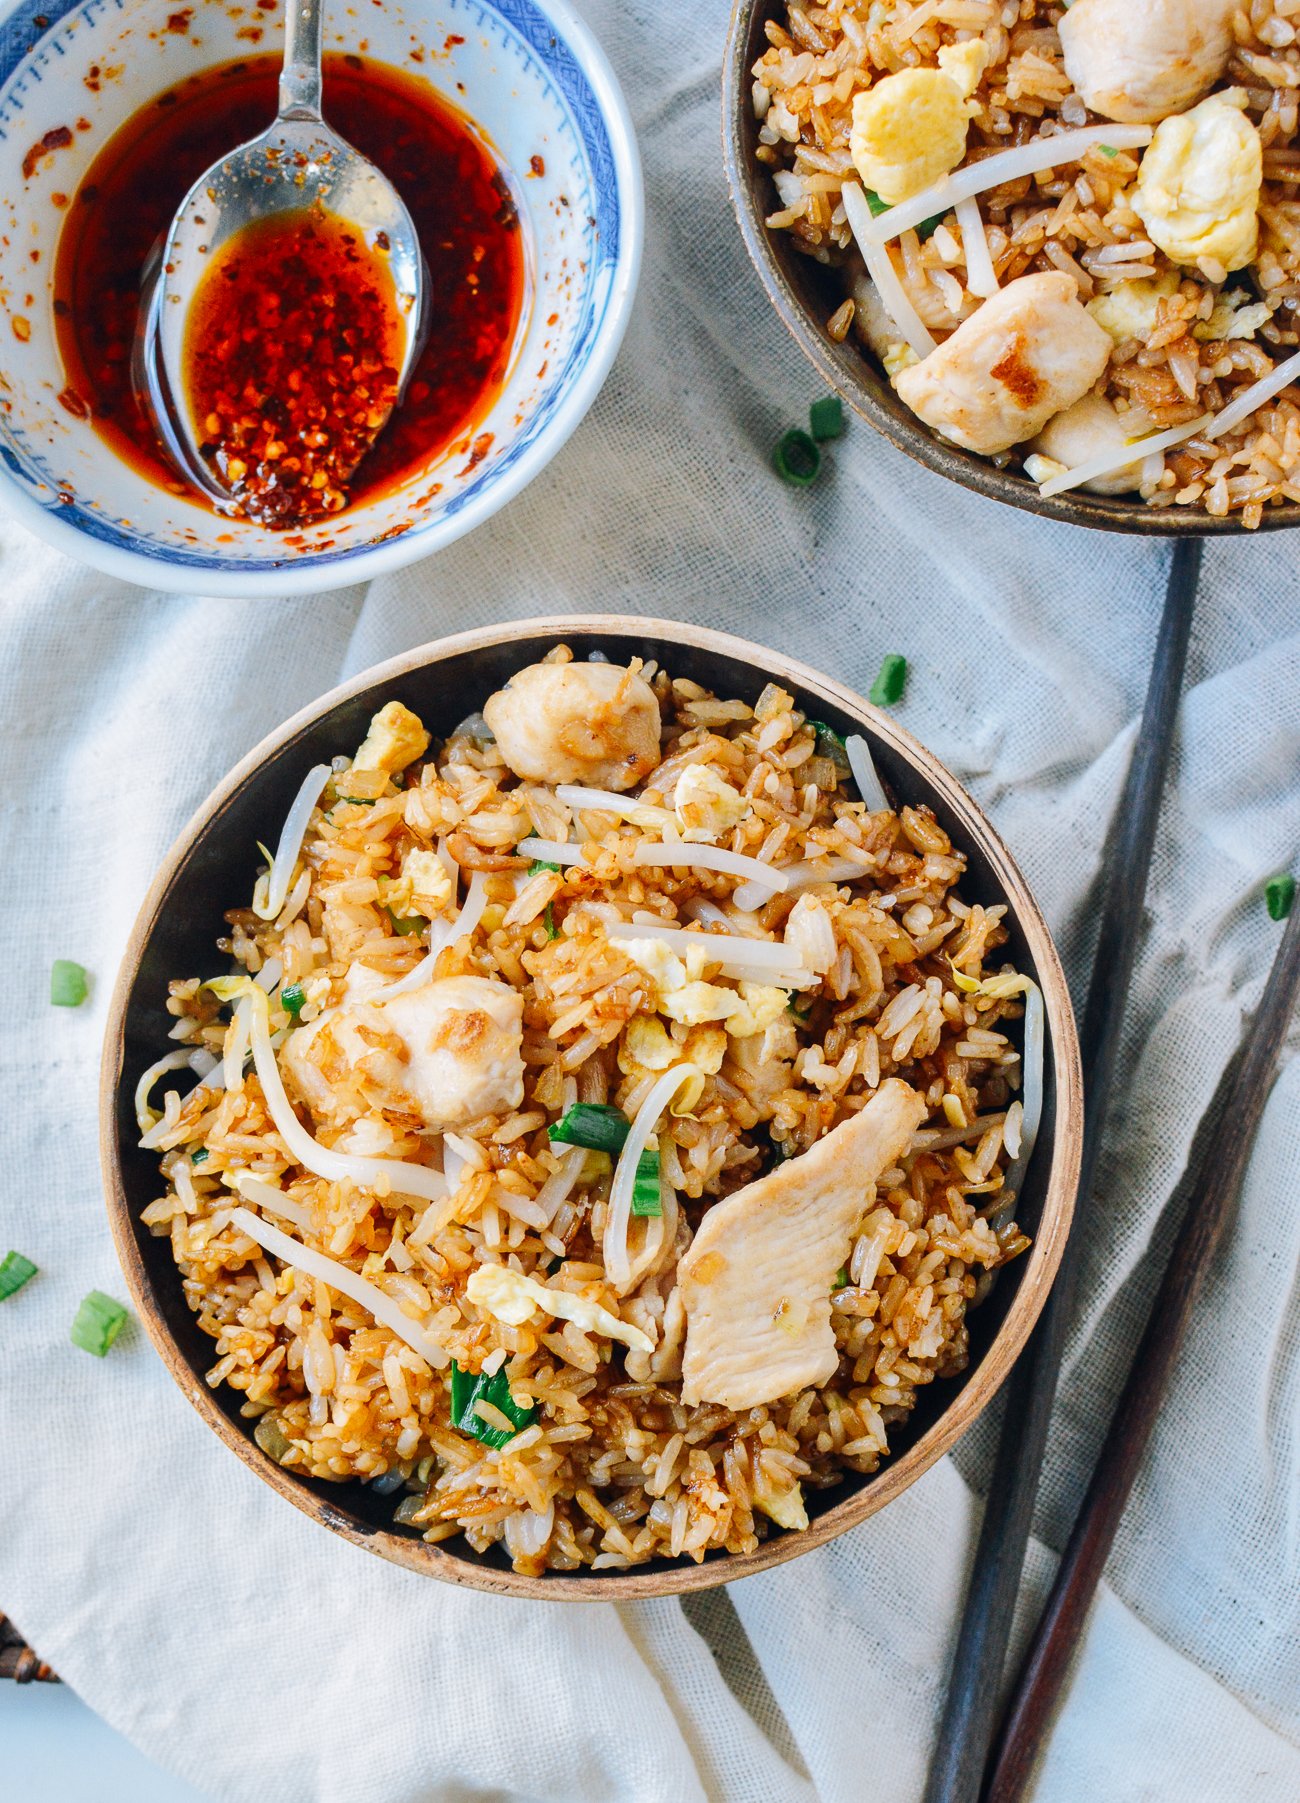 Bowl of Chicken Fried Rice with Chili Oil